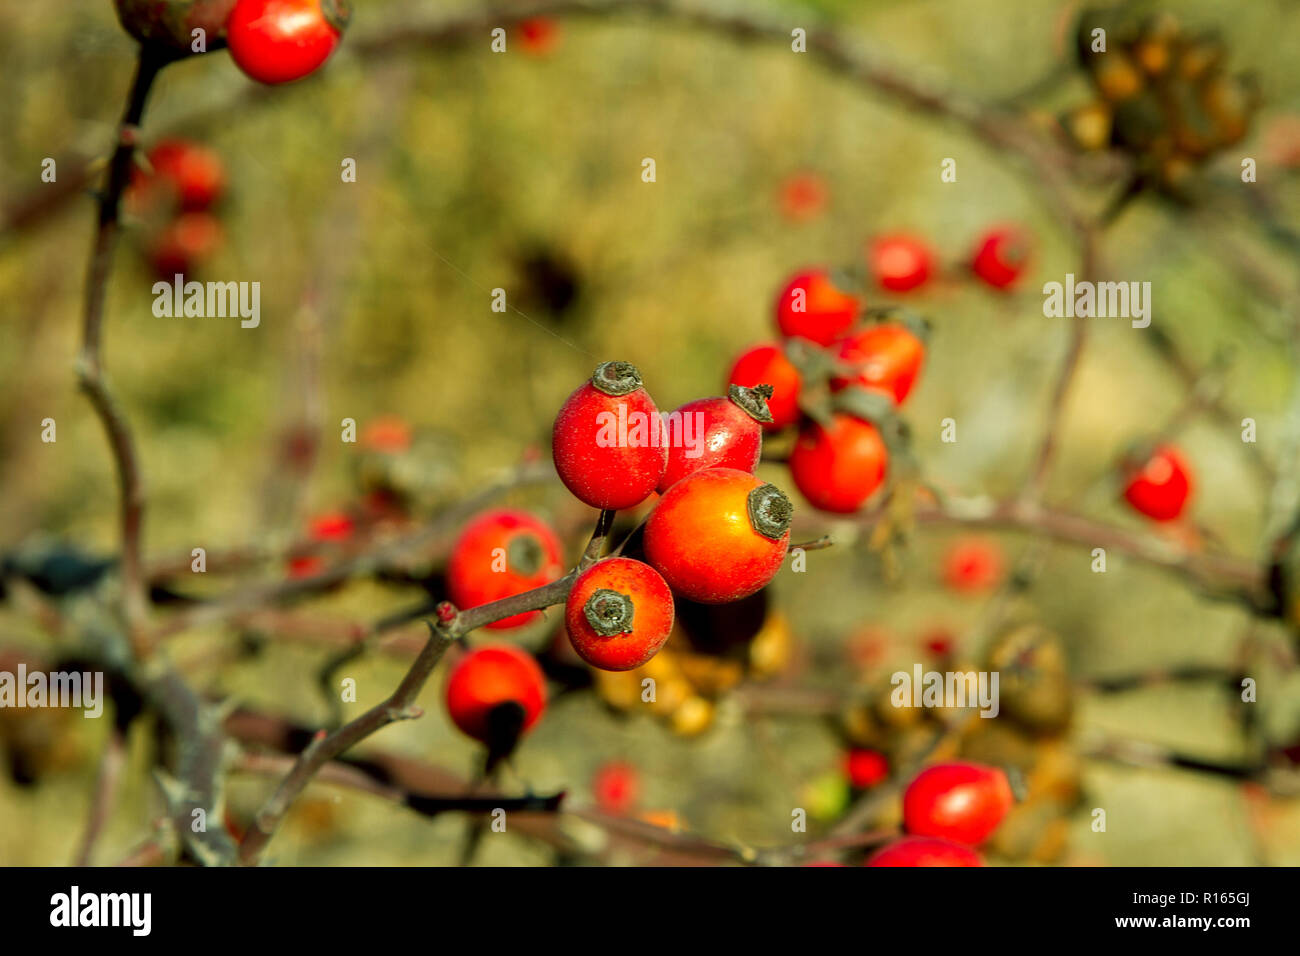 the image of the red rose berries on the bush in autumn Stock Photo